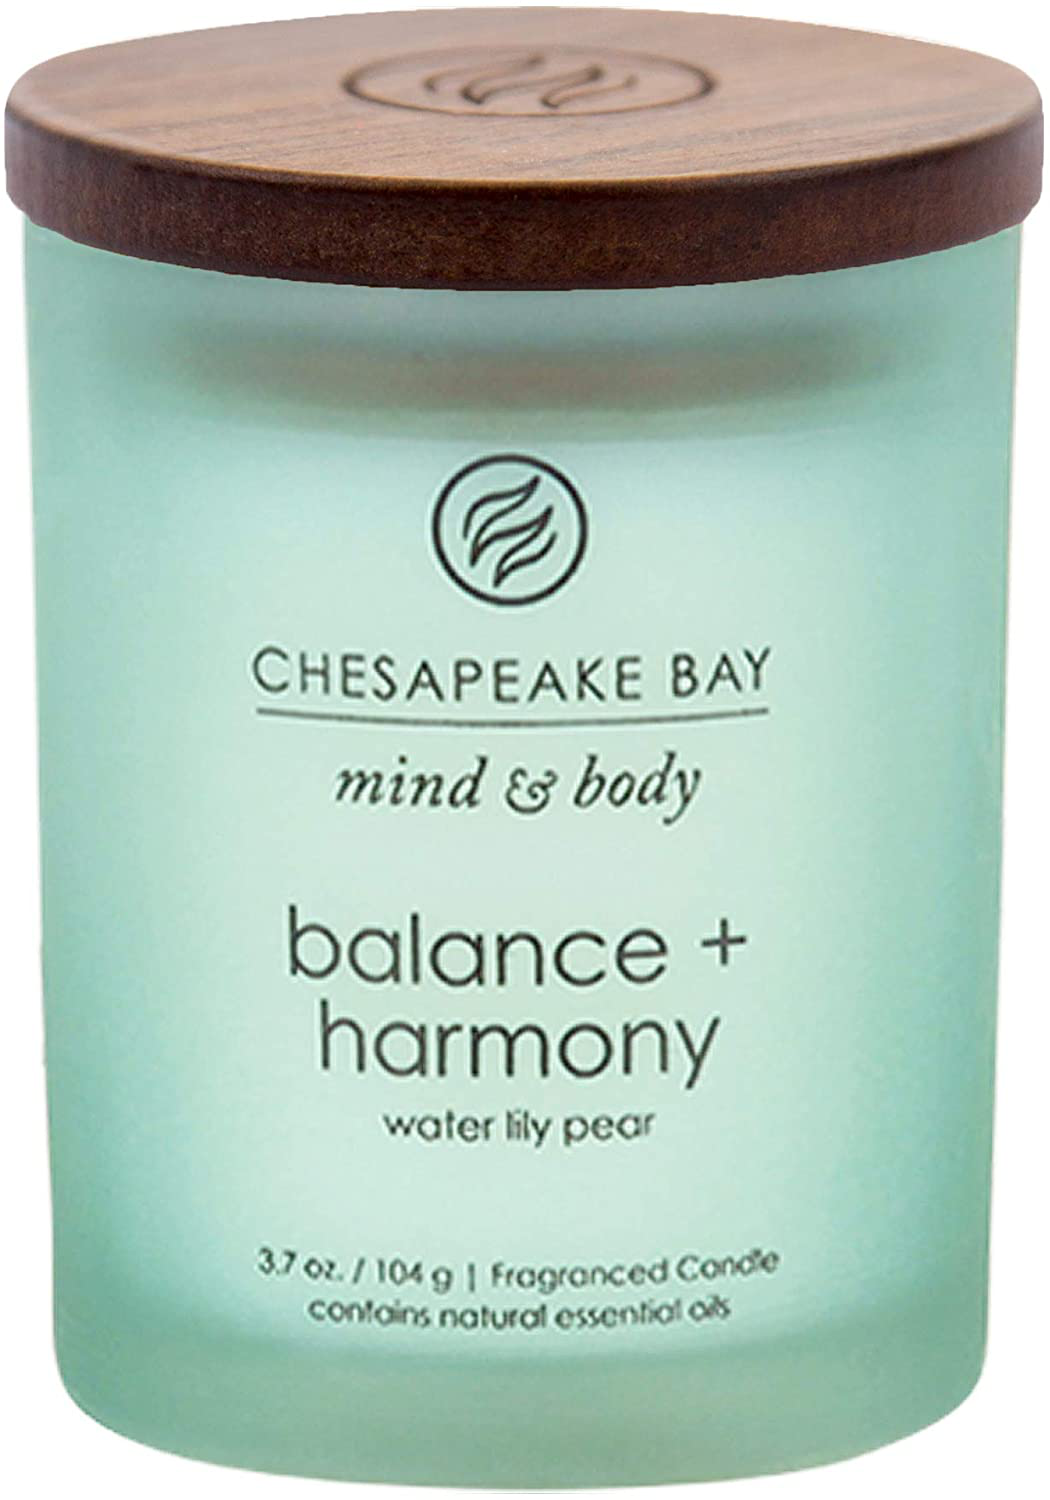 Chesapeake Bay Candle Scented Candle, Serenity + Calm (Lavender Thyme), Large, 12 Ounce